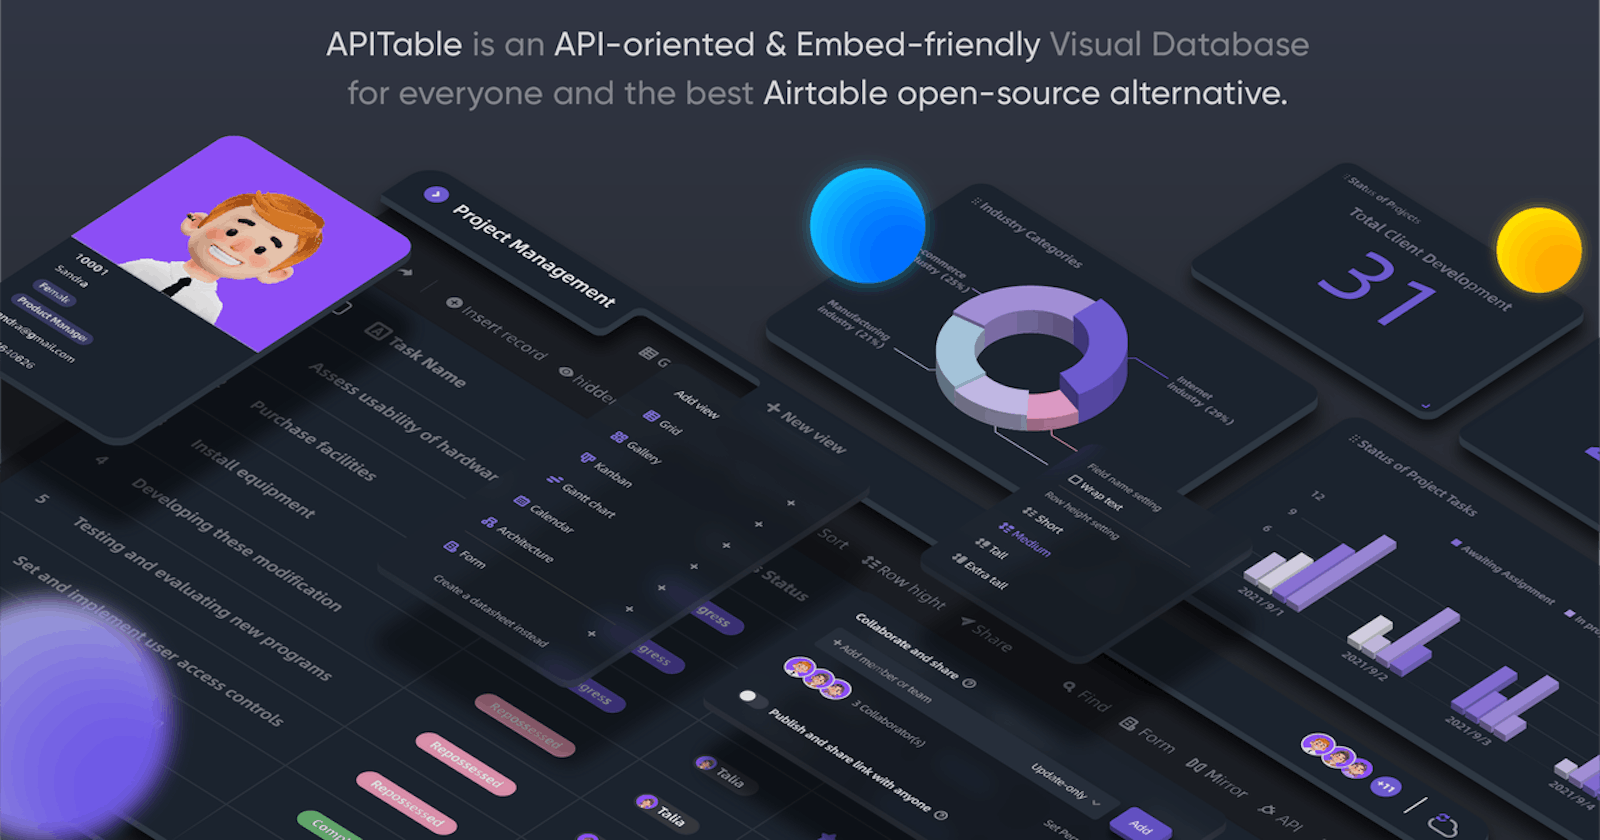 APITable: The ultimate open-source alternative to Airtable, surpassing all others